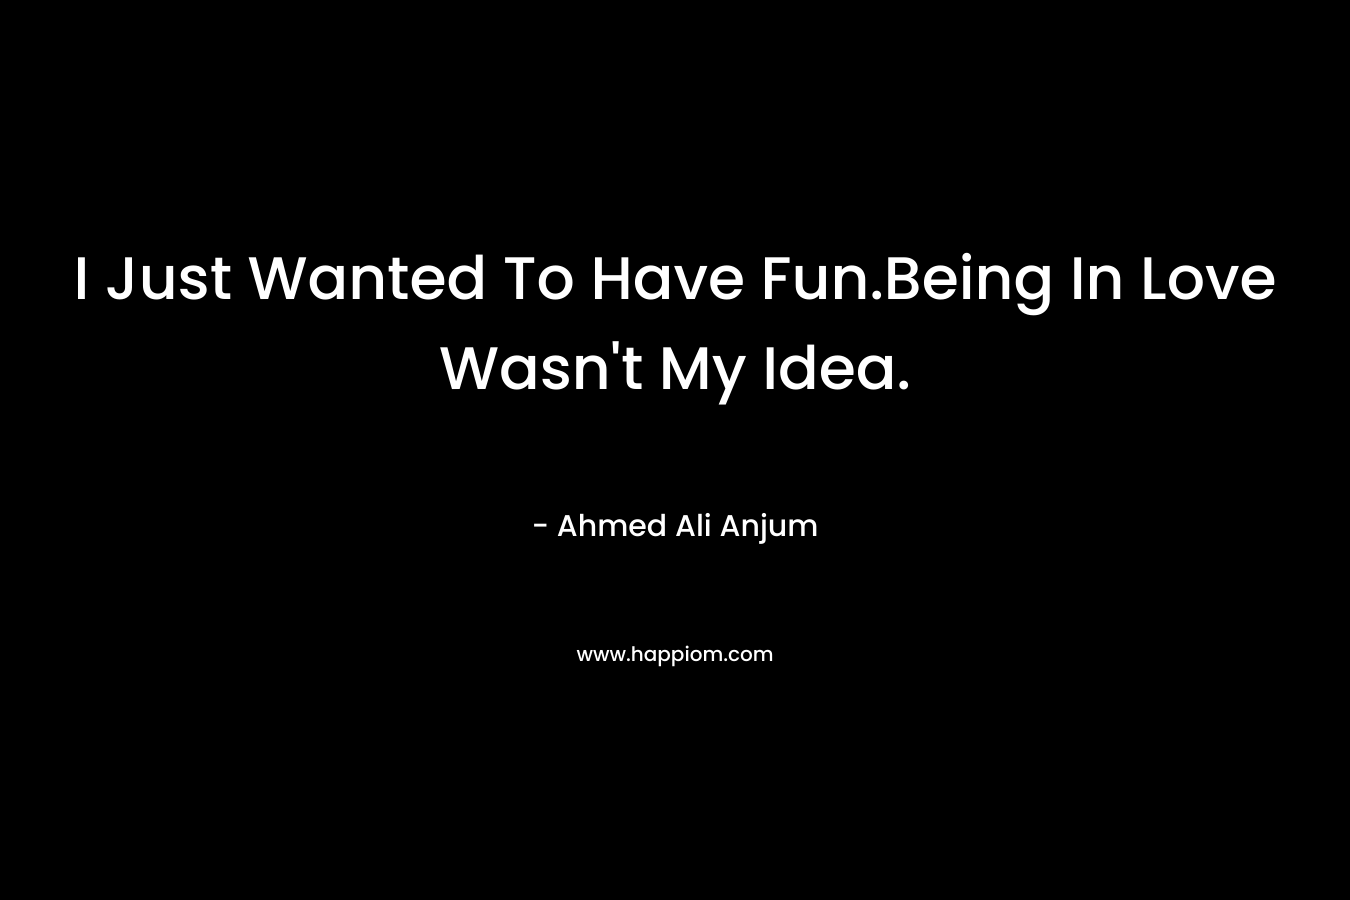 I Just Wanted To Have Fun.Being In Love Wasn’t My Idea. – Ahmed Ali Anjum